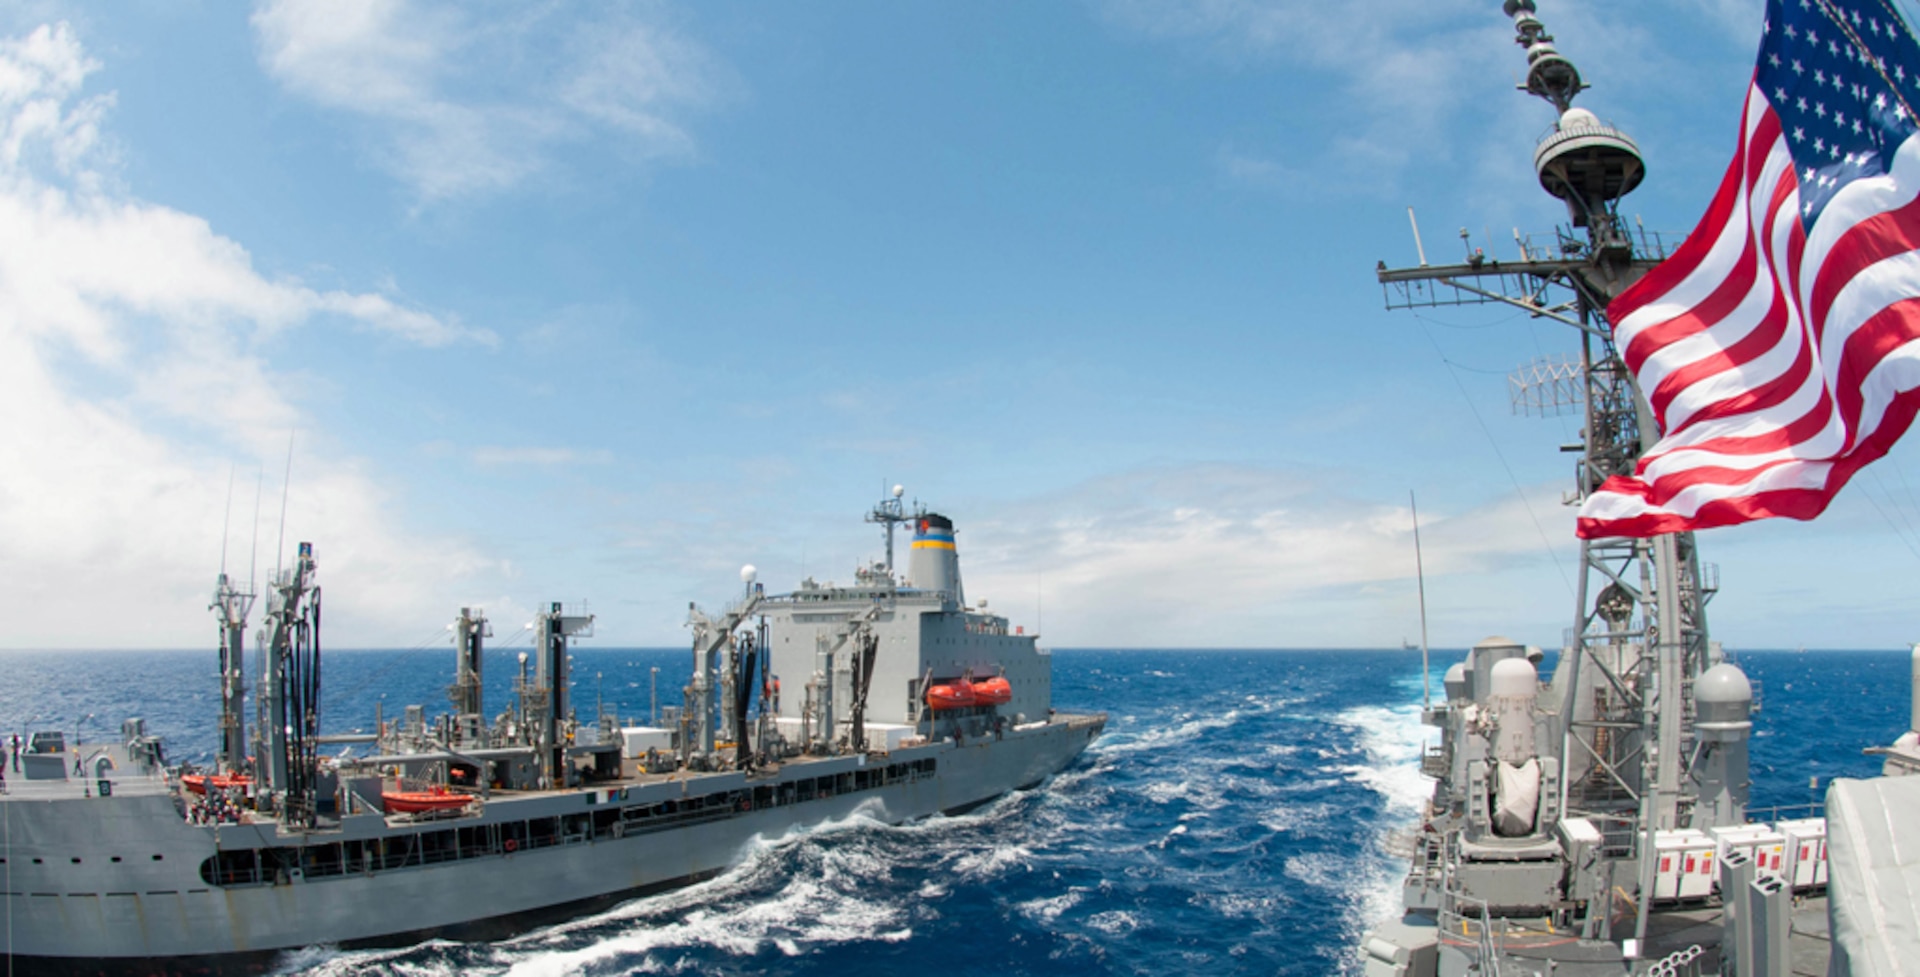 Official U.S. Navy file photo of guided-missile cruiser USS Princeton (CG 59) pulling alongside the military sealift command fleet replenishment oiler USNS Henry J. Kaiser (T-AO 187) to refuel at sea with biofuel during The Great Green Fleet demonstration portion of the Rim of the Pacific (RIMPAC) 2012 exercise. Princeton took on a 50-50 blend of advanced biofuel and traditional petroleum-based fuel. 